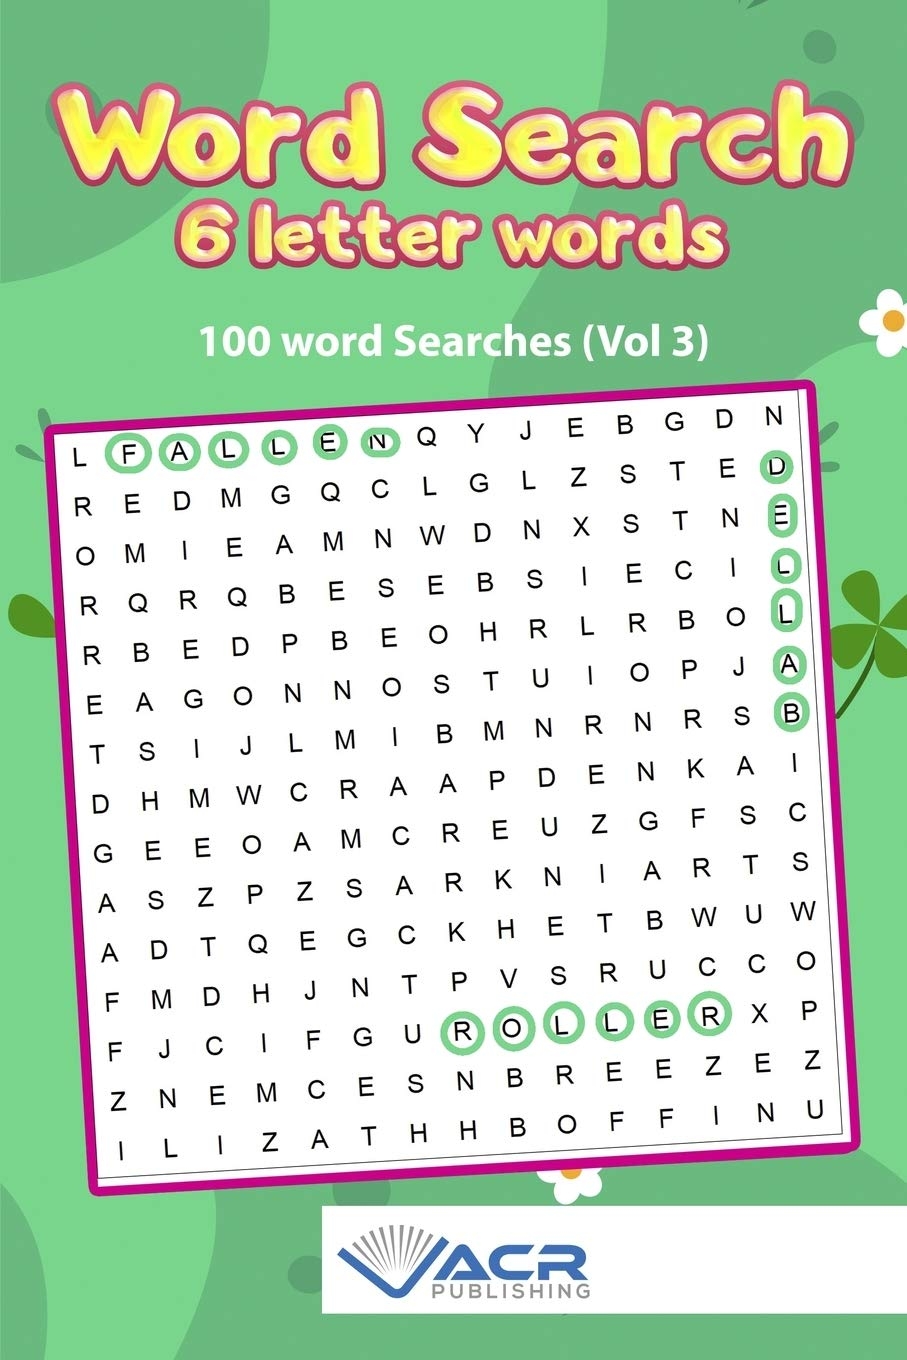 Word Search 6 Letter Words 100 Word Searches By ACR Publishing Goodreads